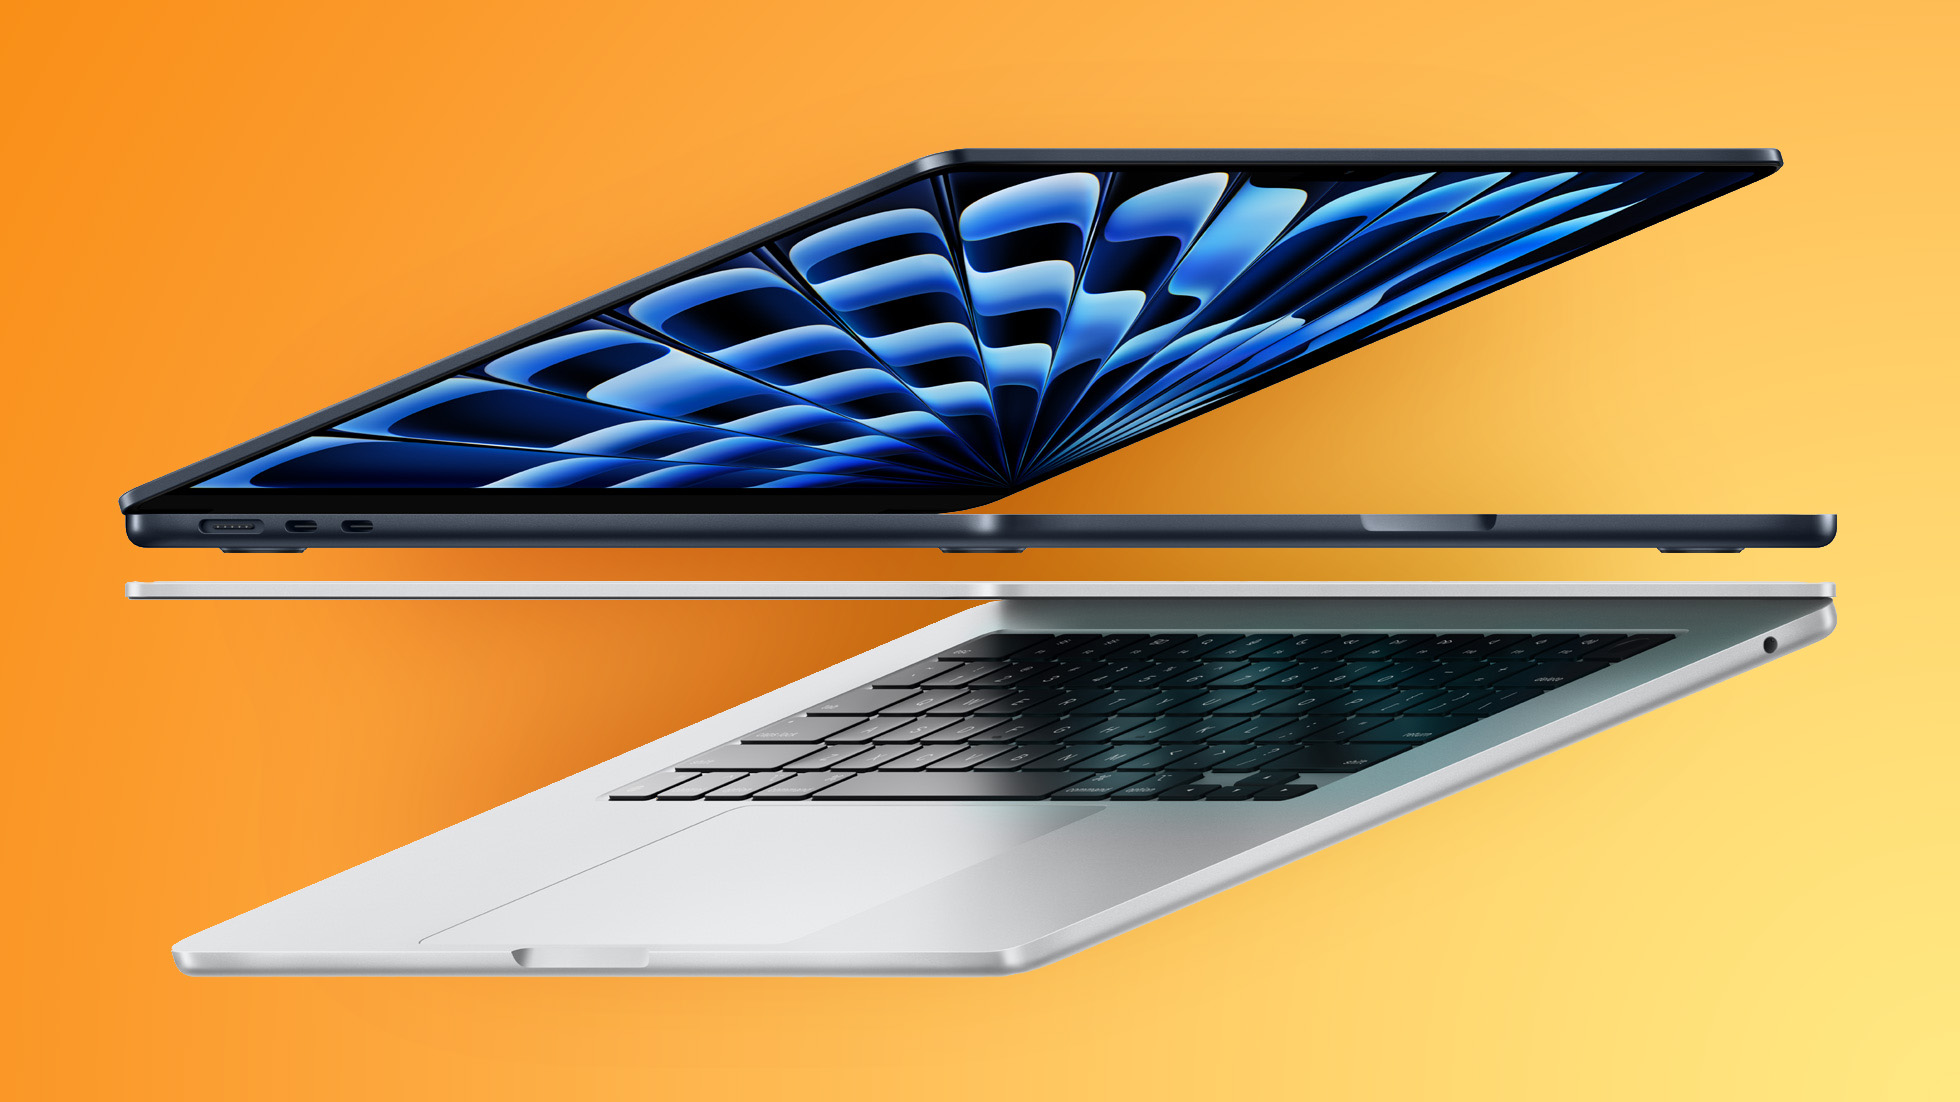 Best Buy Takes $100 Off Every Model of the 13-Inch M3 MacBook Air